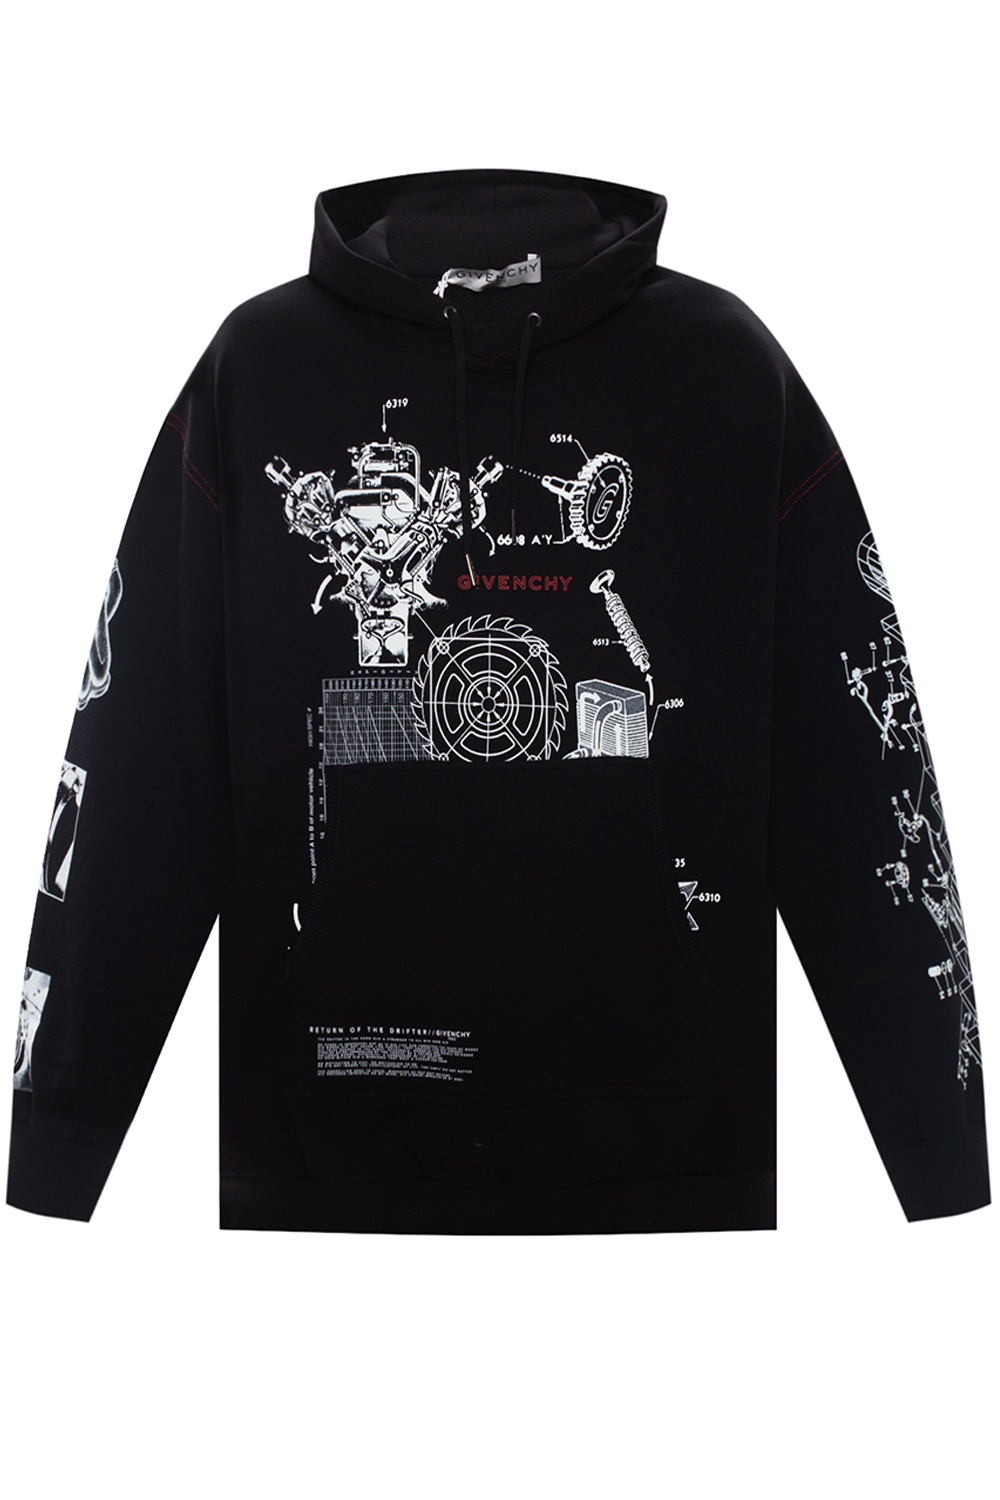 givenchy hoodie canada